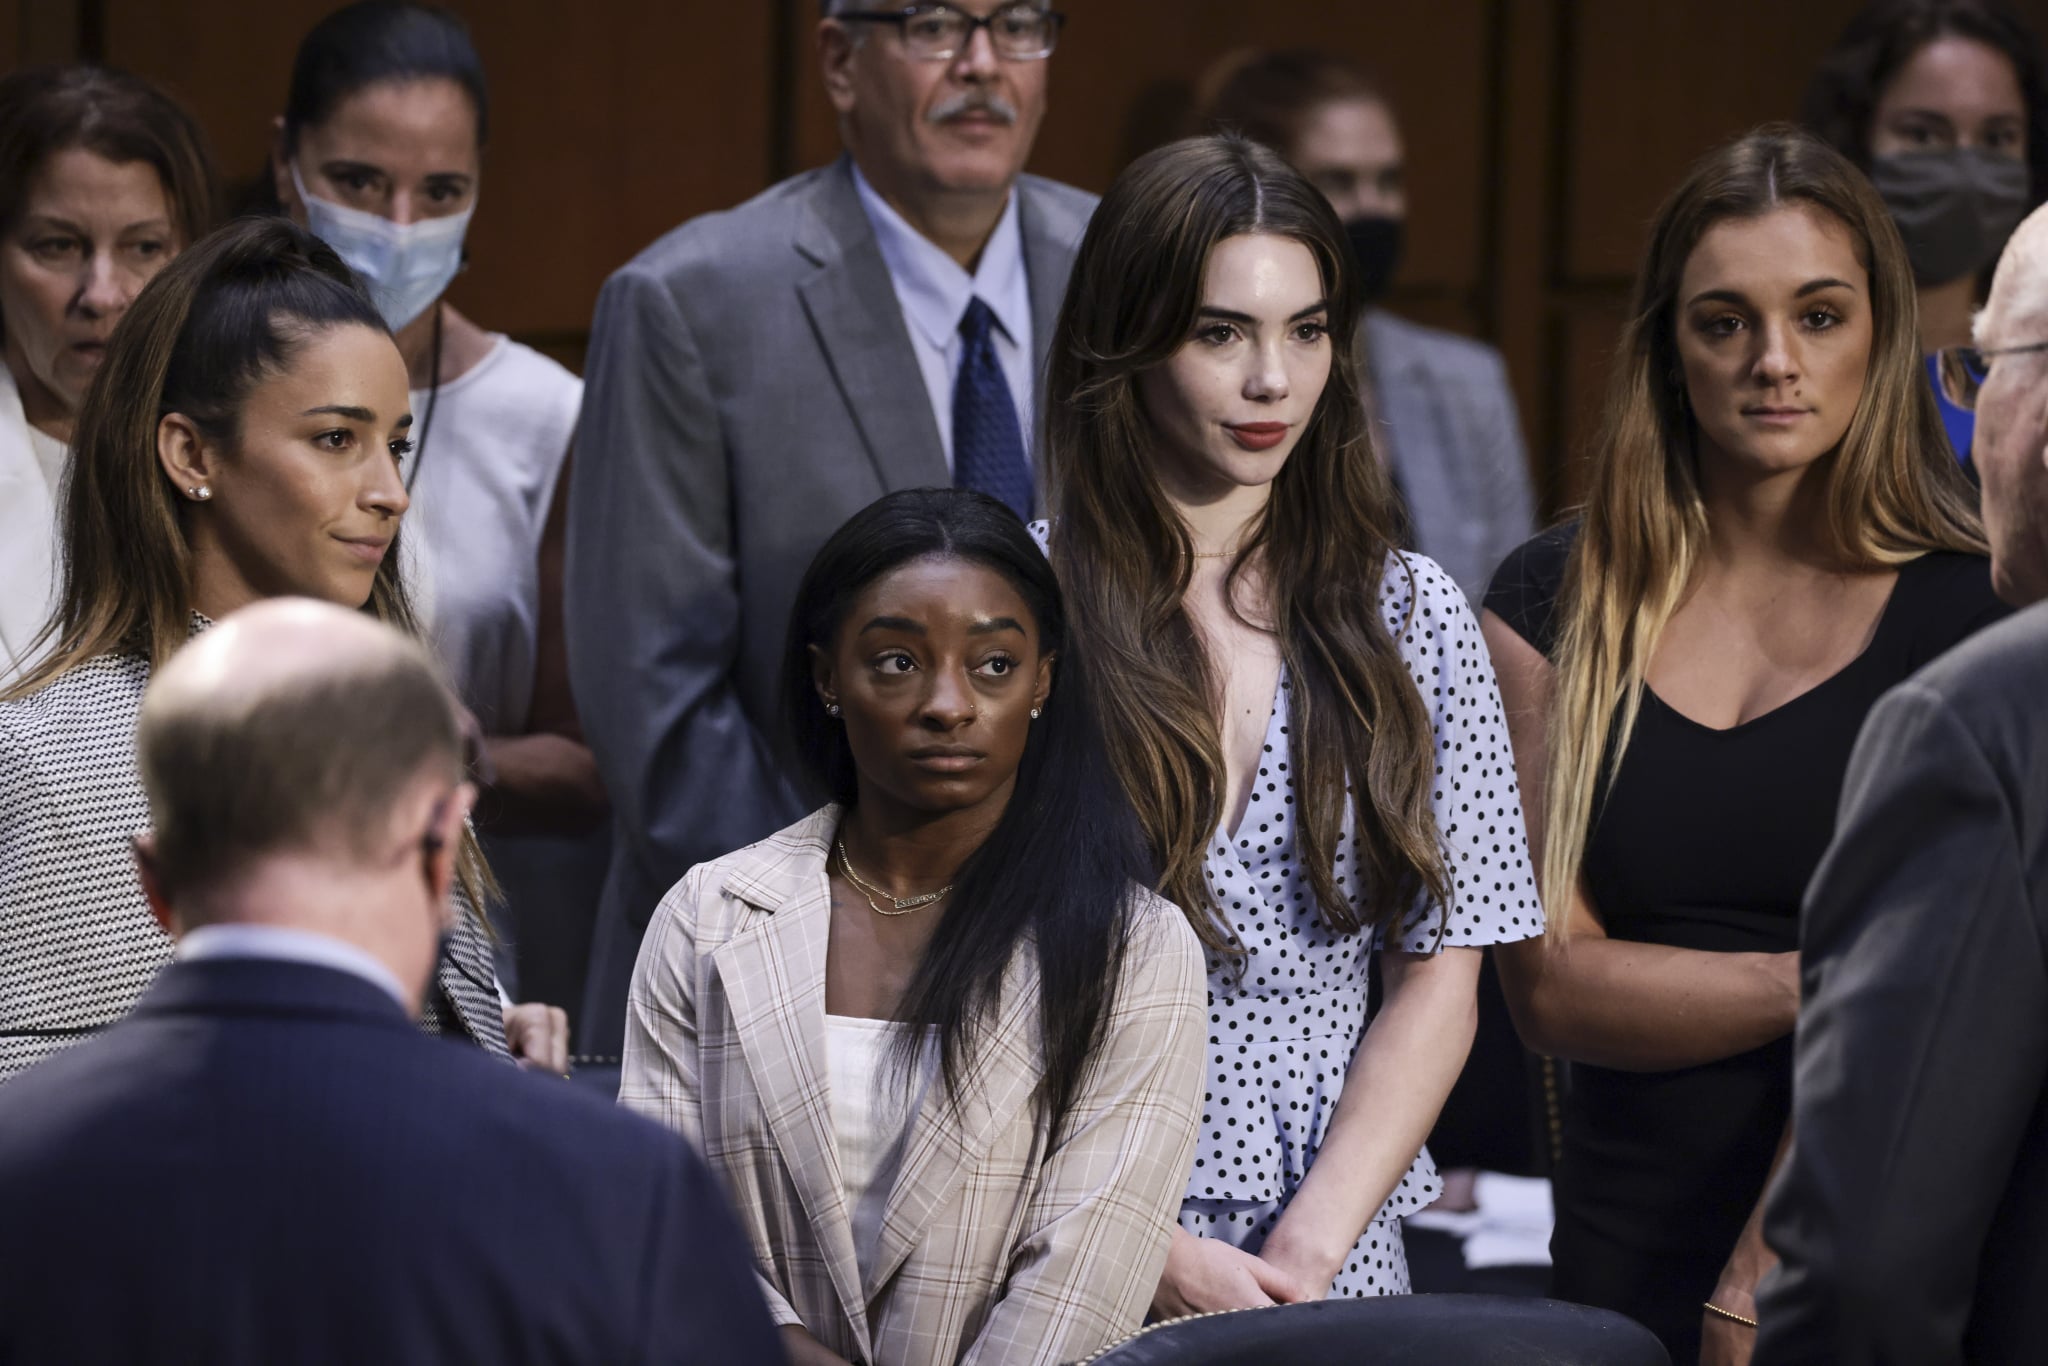 Gymnasts Aly Raisman, Simone Biles, McKayla Maroney and Maggie Nichols speak to the Senate Judiciary committee about the FBI handling of the Larry Nassar investigation of sexual abuse of gymnasts.